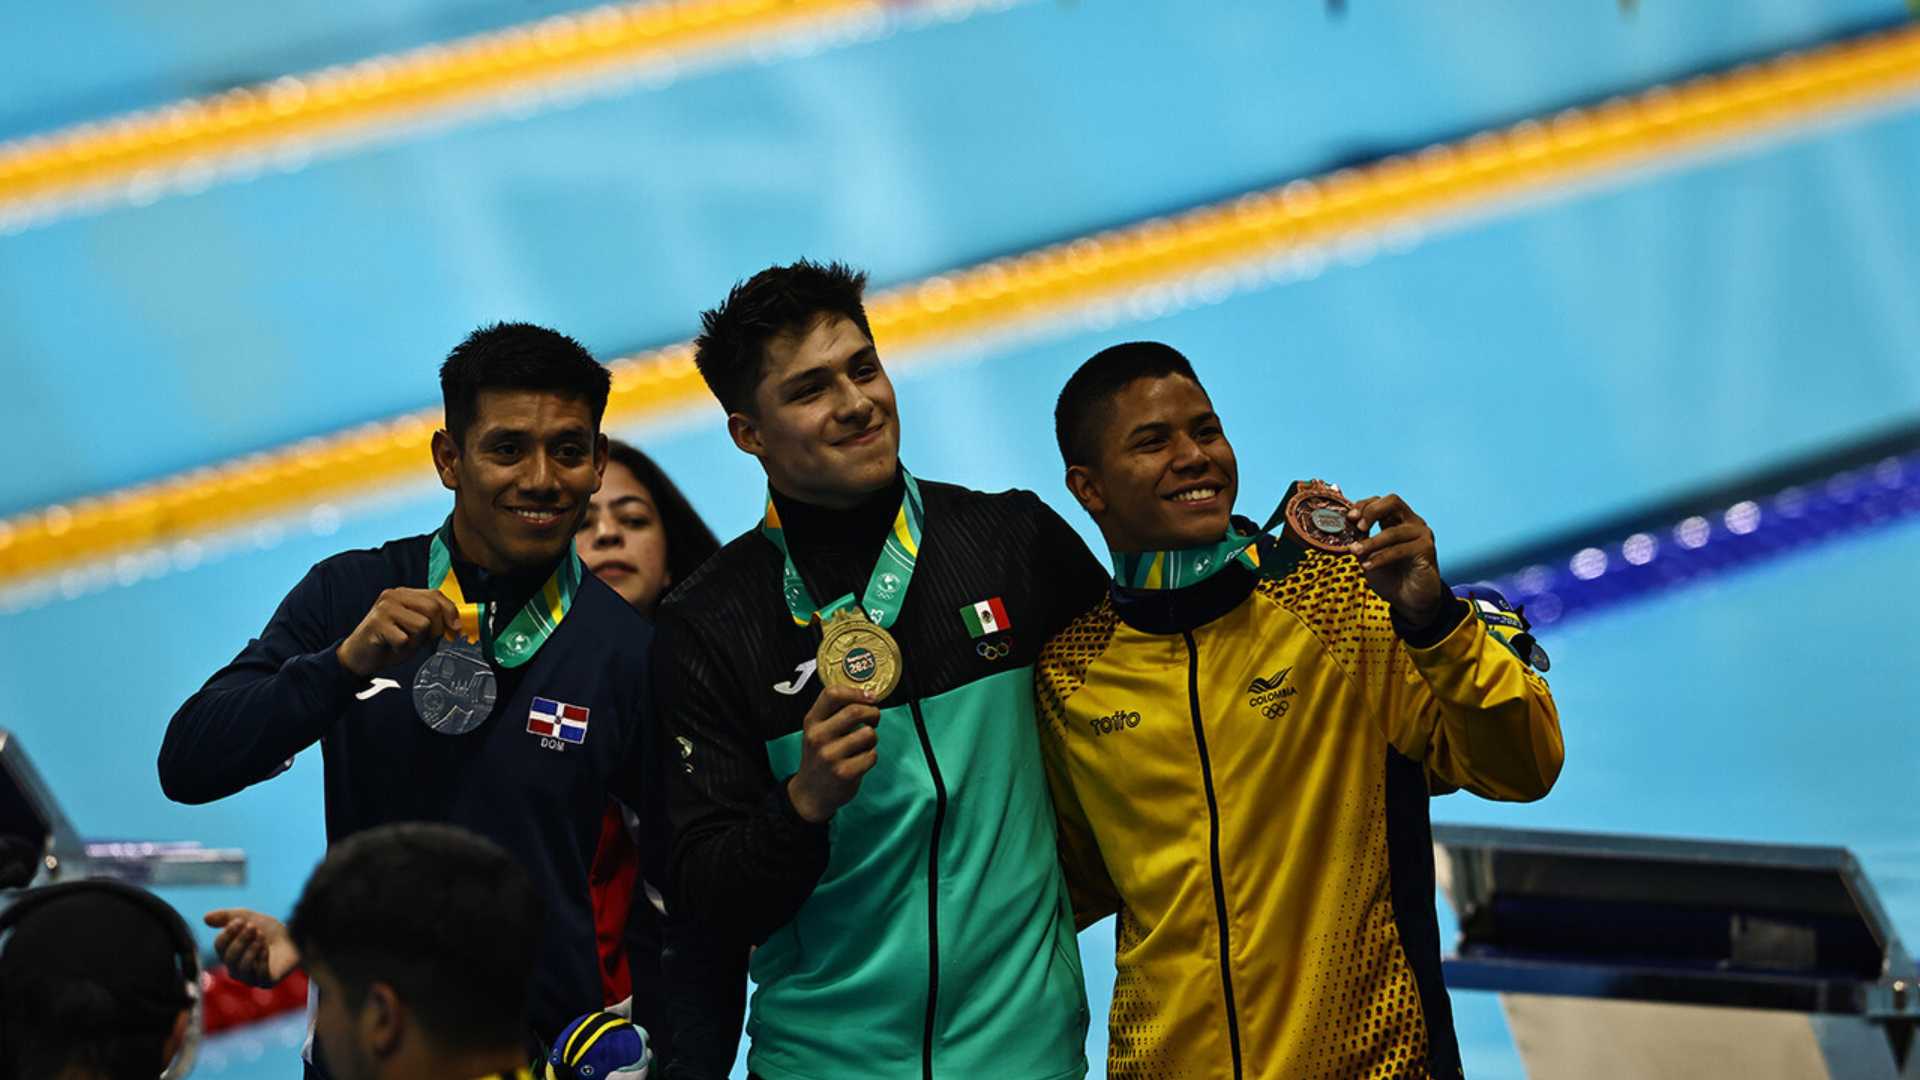 Mexico dominates diving and wins gold medal in the male's 1m springboard